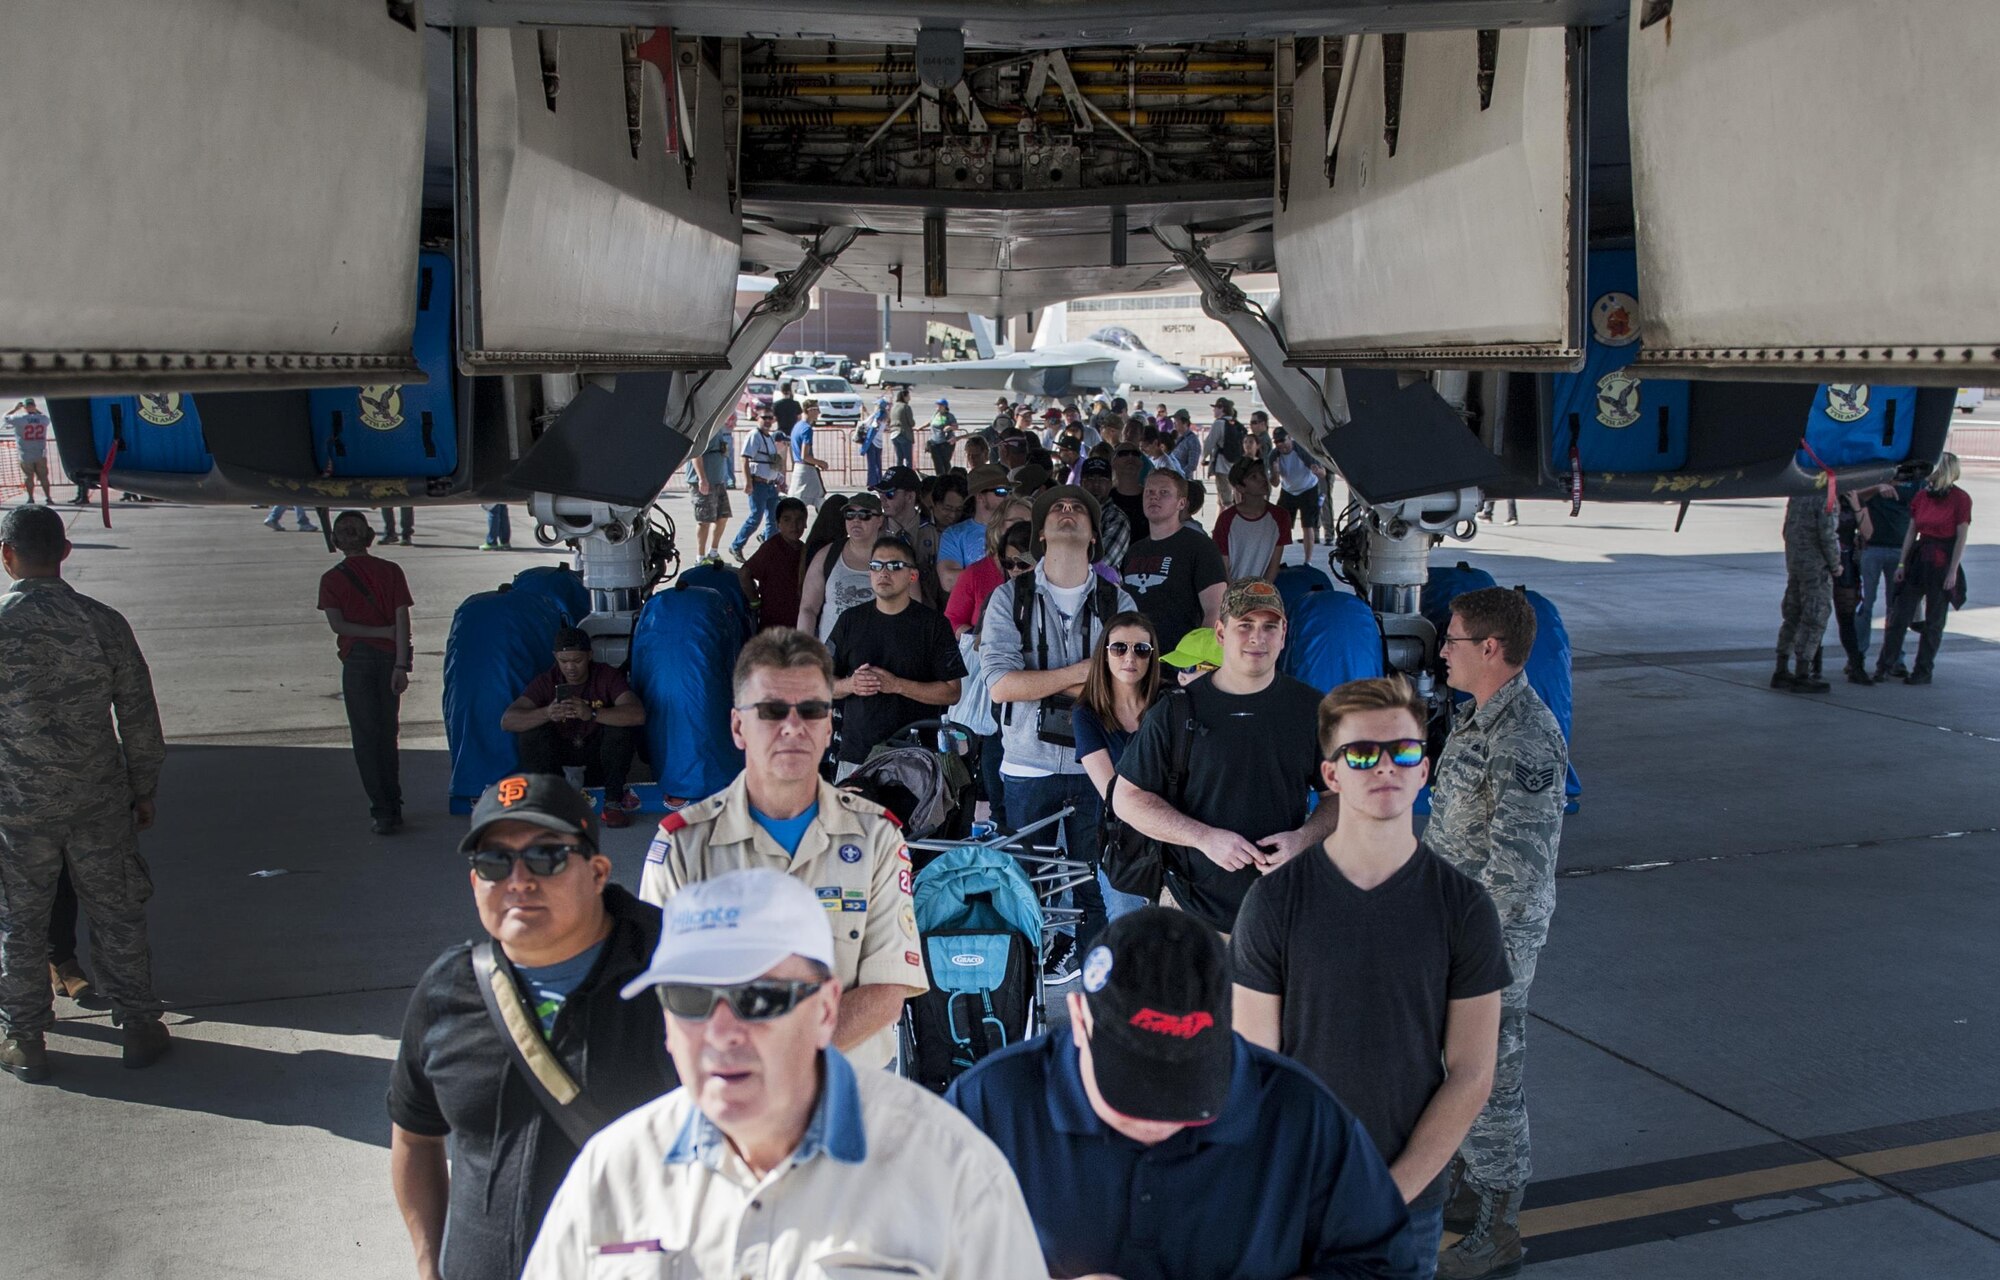 Spectators from the Aviation Nation air show wait in line to enter the cockpit of the B-1 Lancer on Nellis Air Force Base, Nev., Nov. 12, 2016. To strengthen this relationship, the 2016 Aviation Nation air show played host to a record number of attendees from all around the globe. (U.S. Air Force photo by Airman 1st Class Kevin Tanenbaum/Released)